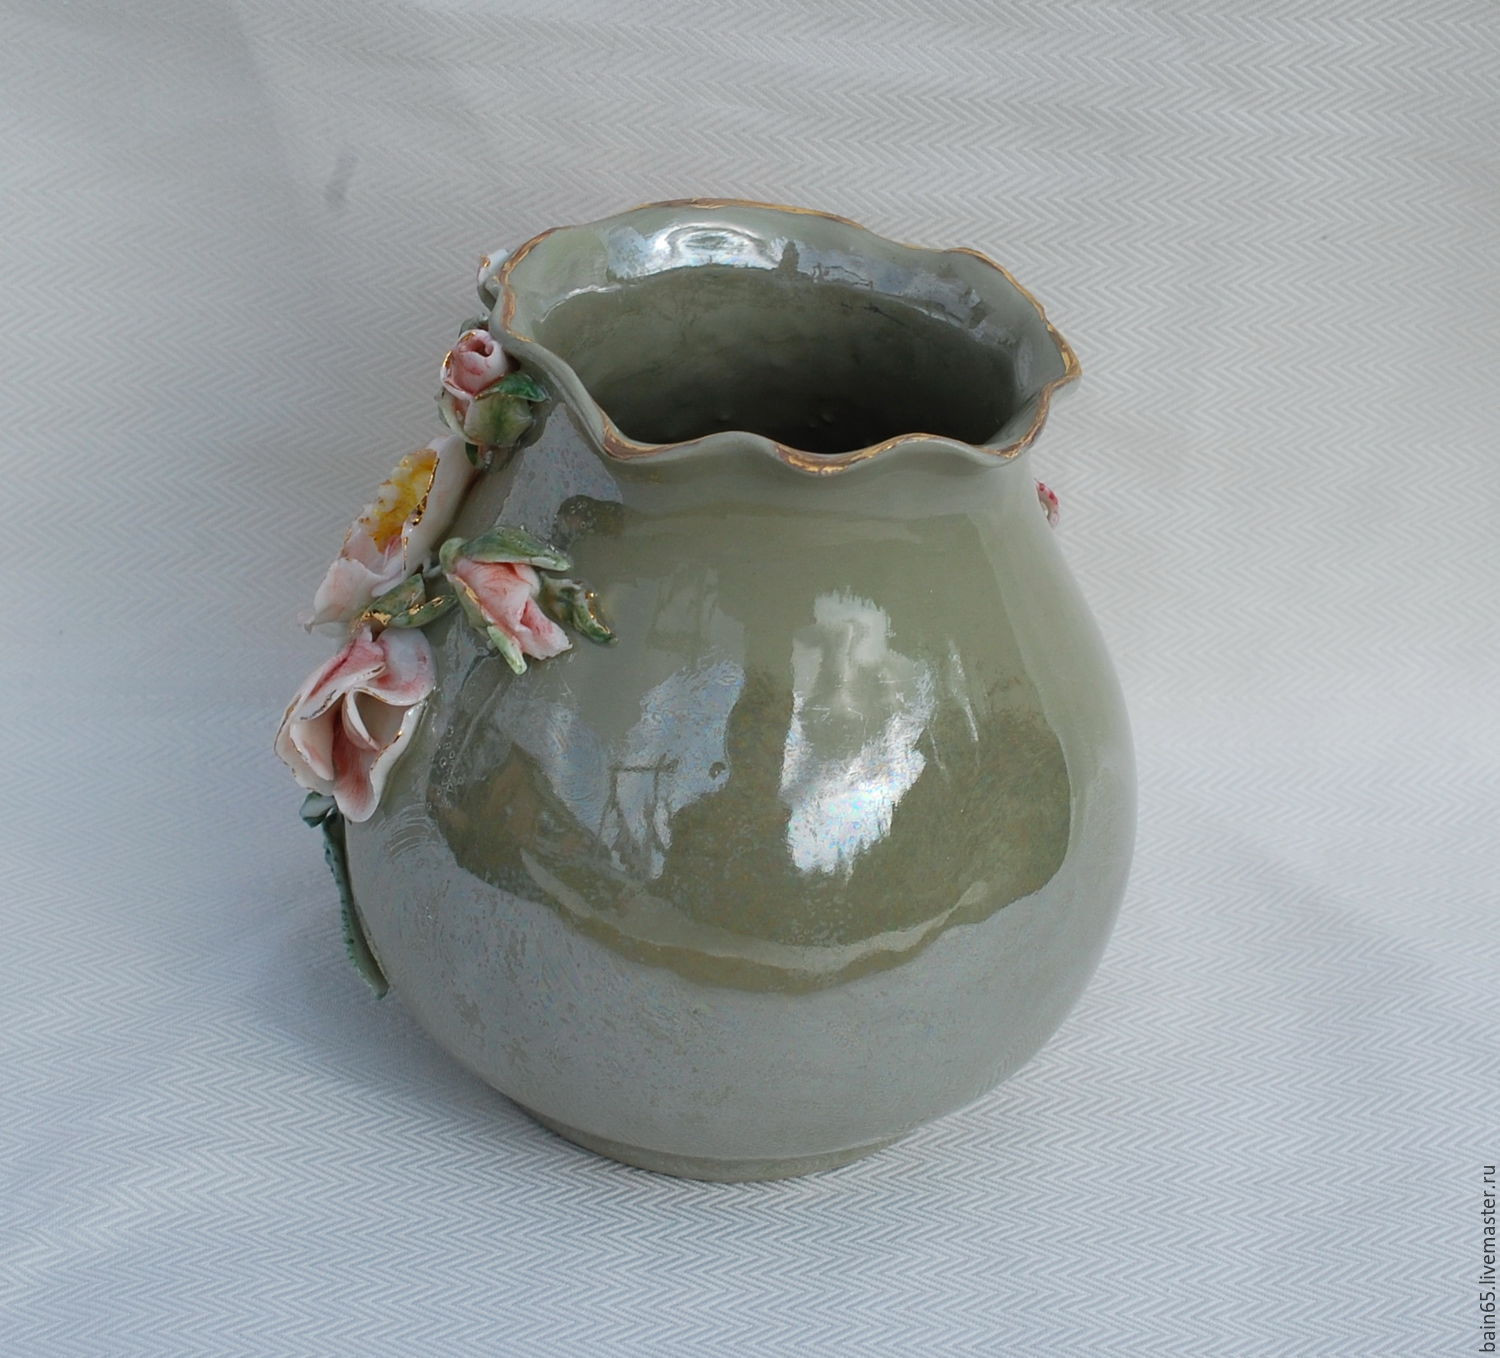 17 Lovable English Pottery Vases 2024 free download english pottery vases of pale pink wild rose vase porcelain shop online on livemaster with intended for vases handmade pale pink wild rose vase porcelain mila